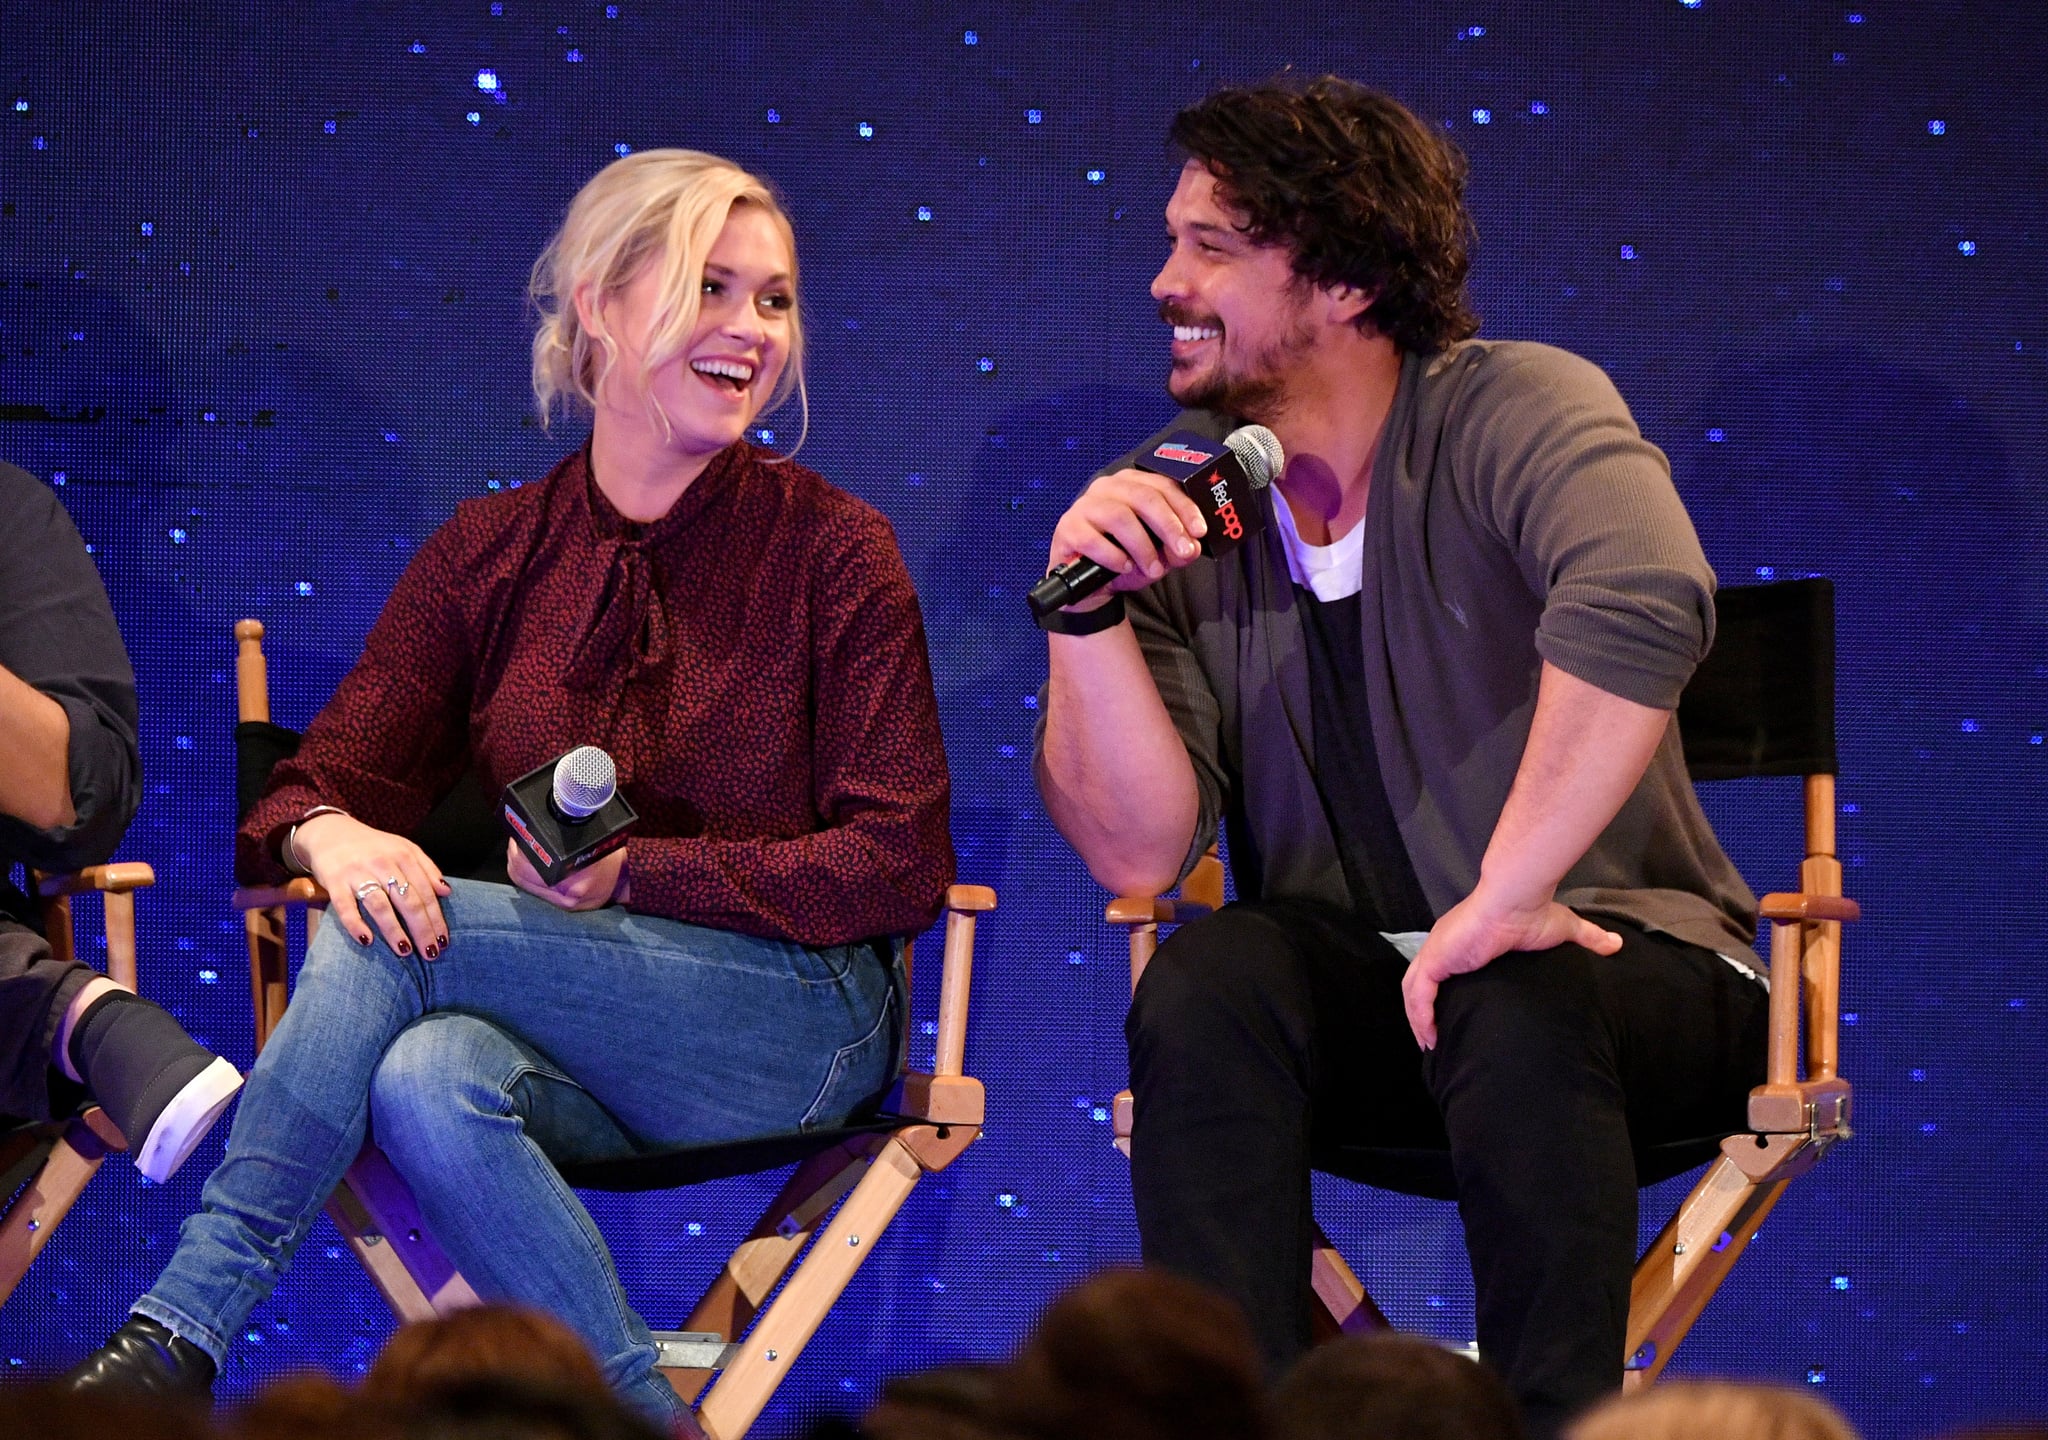 NEW YORK, NY - OCTOBER 06:  Eliza Taylor and Bob Morley speak onstage at the WBTV Panel Block: The 100 panel during New York Comic Con at Jacob Javits Center on October 6, 2018 in New York City.  (Photo by Dia Dipasupil/Getty Images for New York Comic Con)